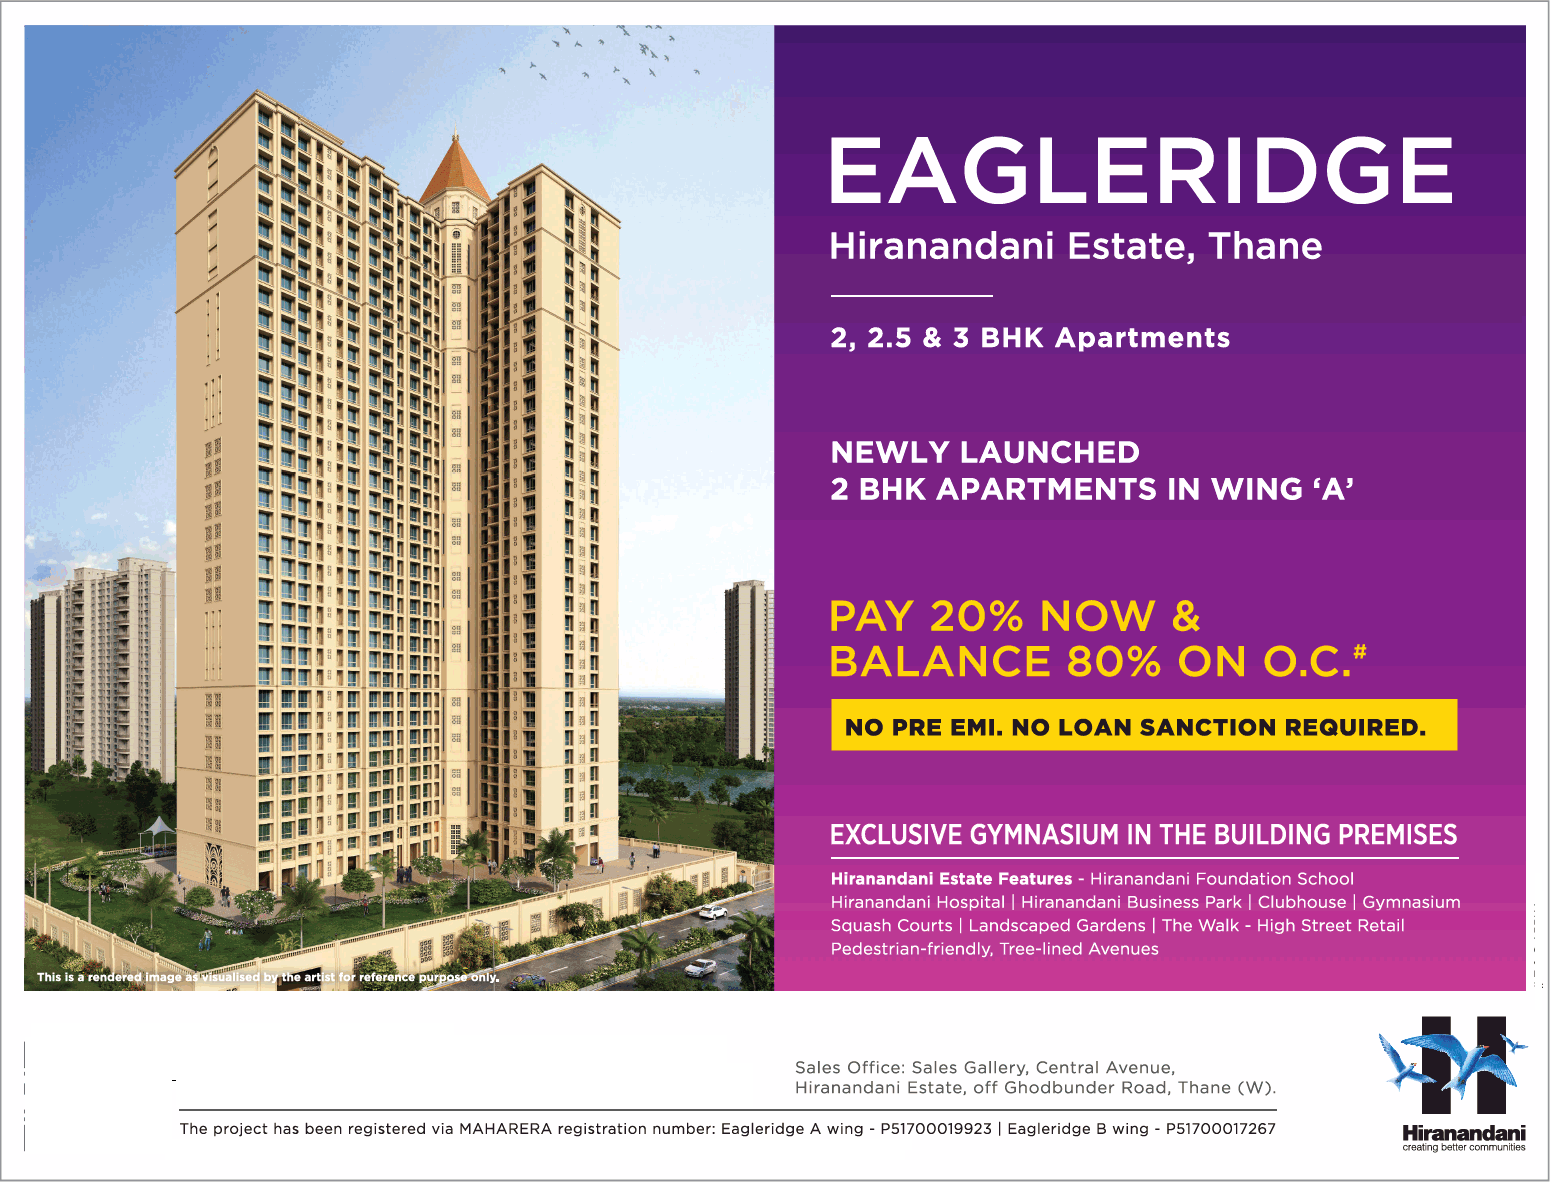 Newly launched 2 BHK apartments in Wing -A by Eagleridge Hiranandani Estate Thane, Mumbai